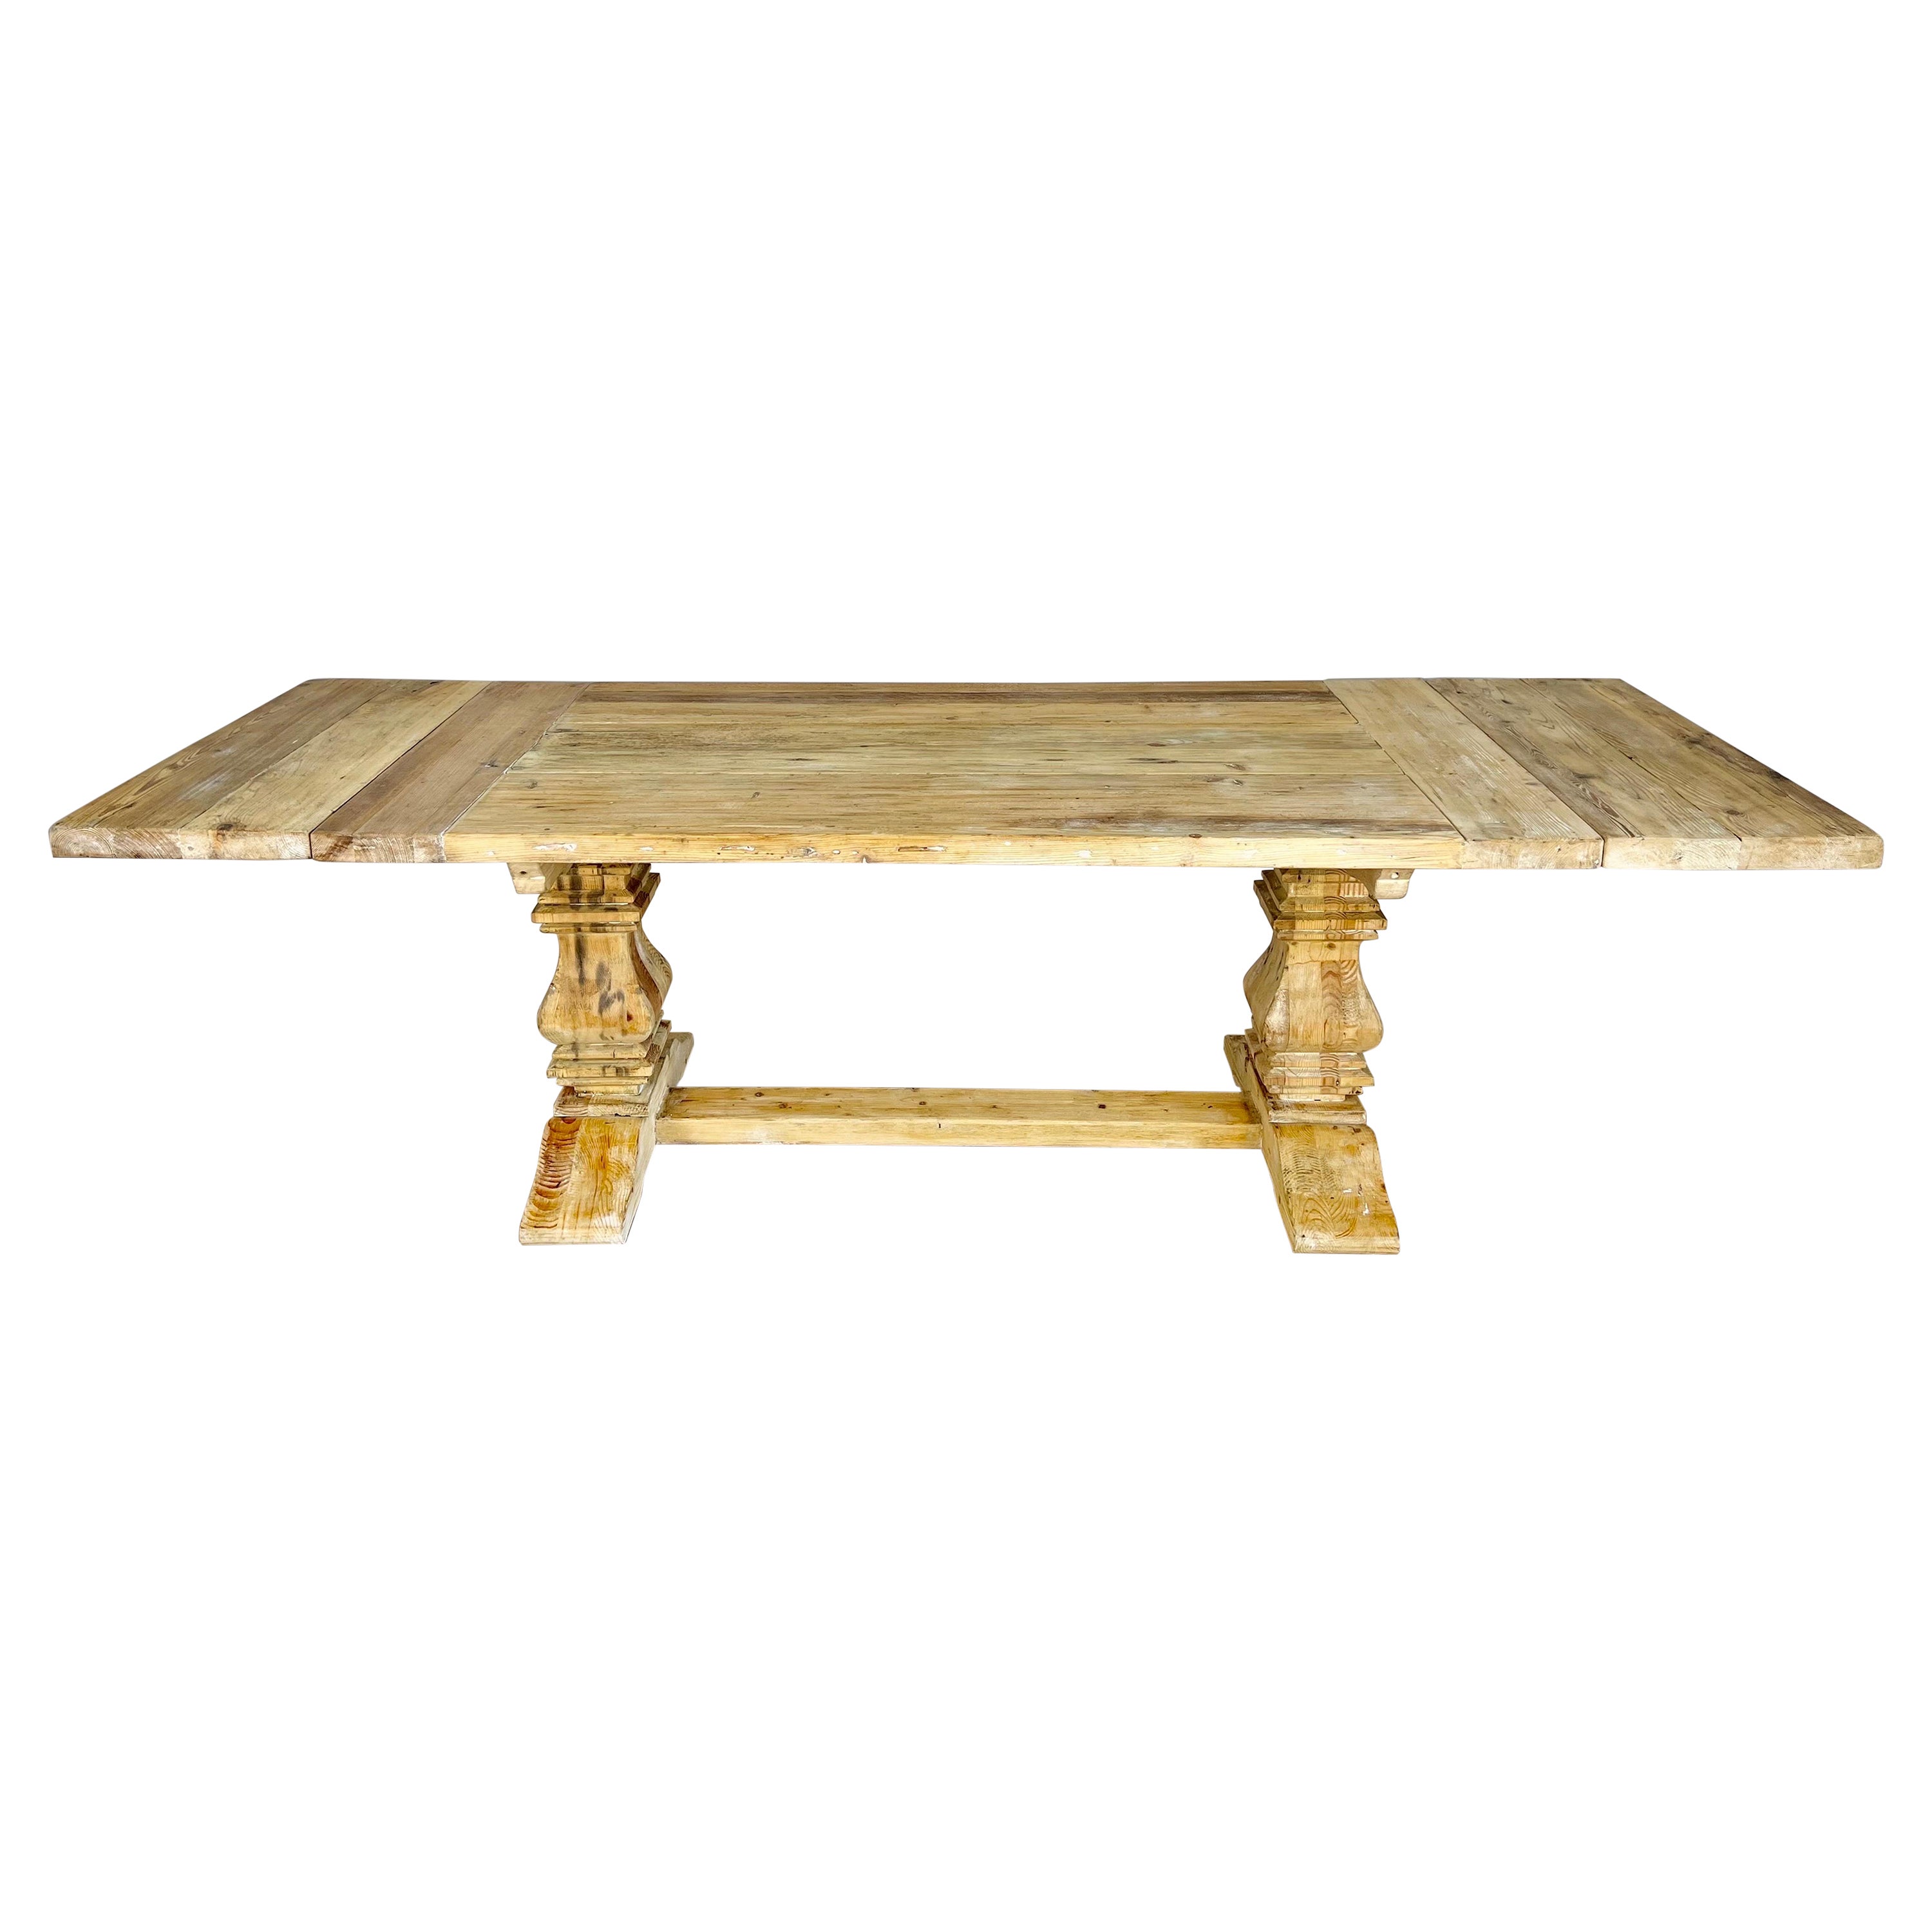 Early 20th C.  Tuscan Style Pine Dining Table w/ Leaves